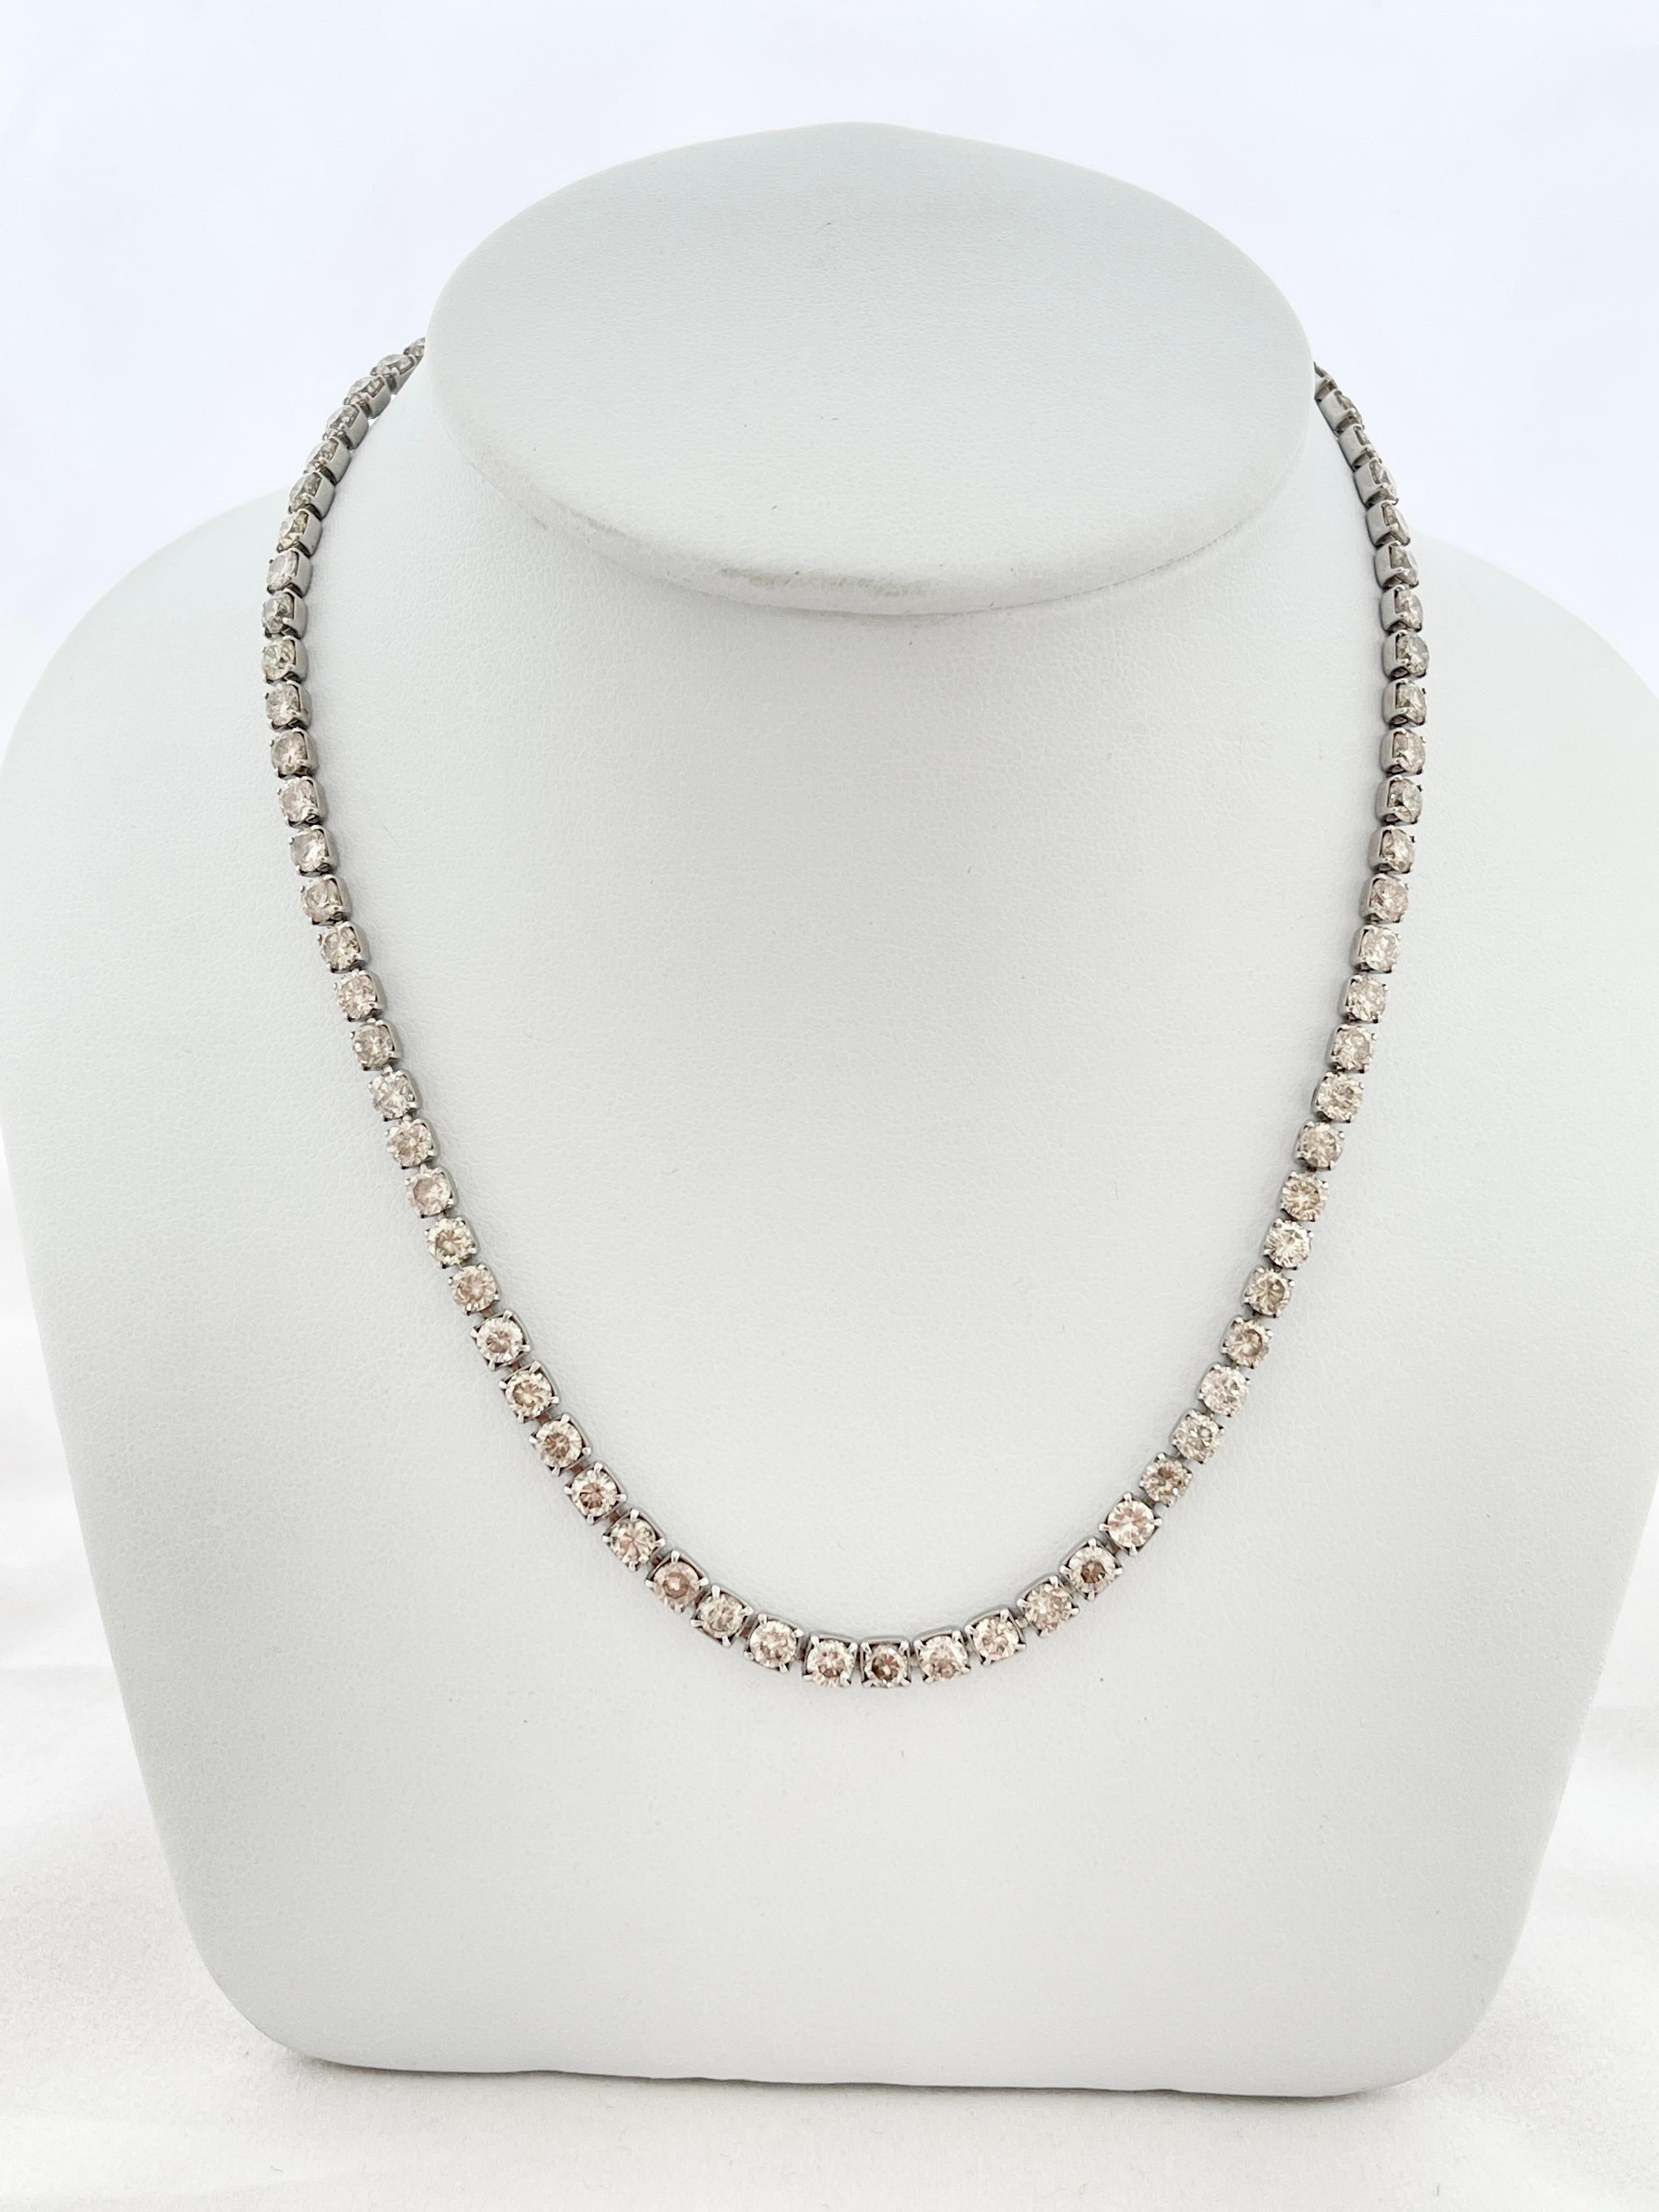 This vintage necklace is a stunning piece of fine jewellery, crafted in 850 platinum and featuring 20 carats of earth mined diamonds. 

The classic tennis style is currently on-trend but it also makes it a timeless piece that will never go out of